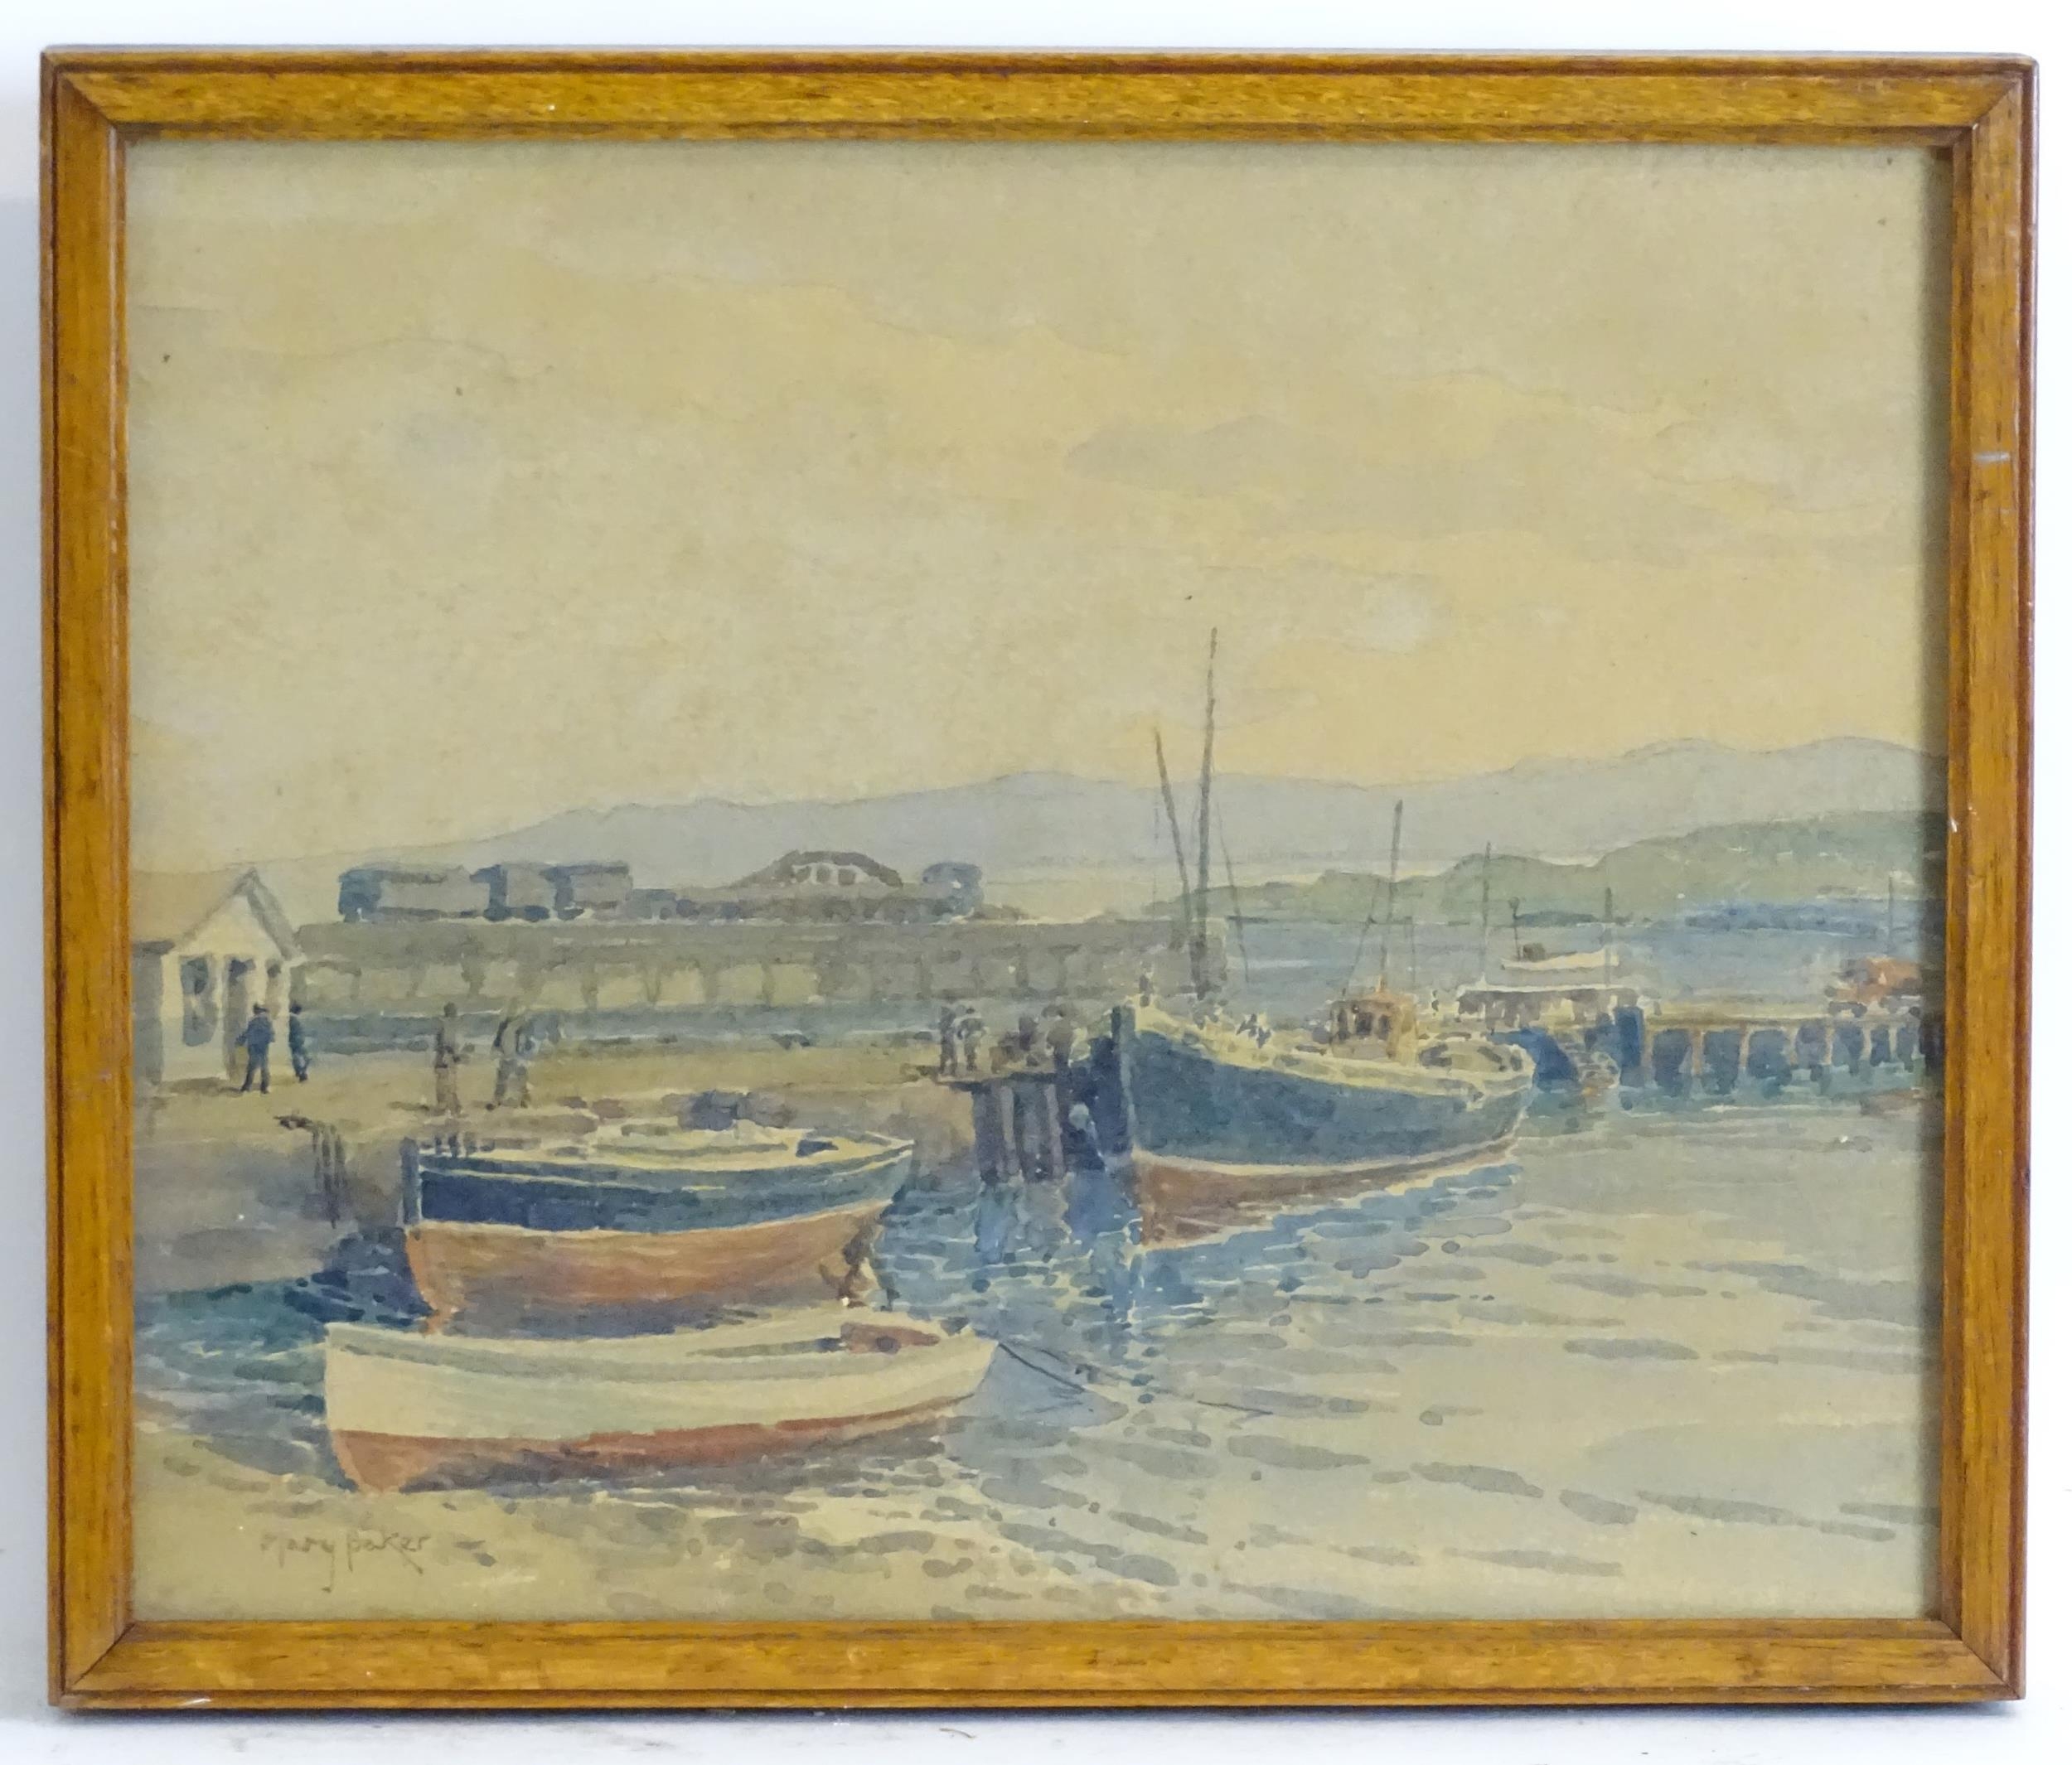 Mary Baker, Watercolour, Mallaig, Scotland, A harbour scene with moored fishing boats. Signed